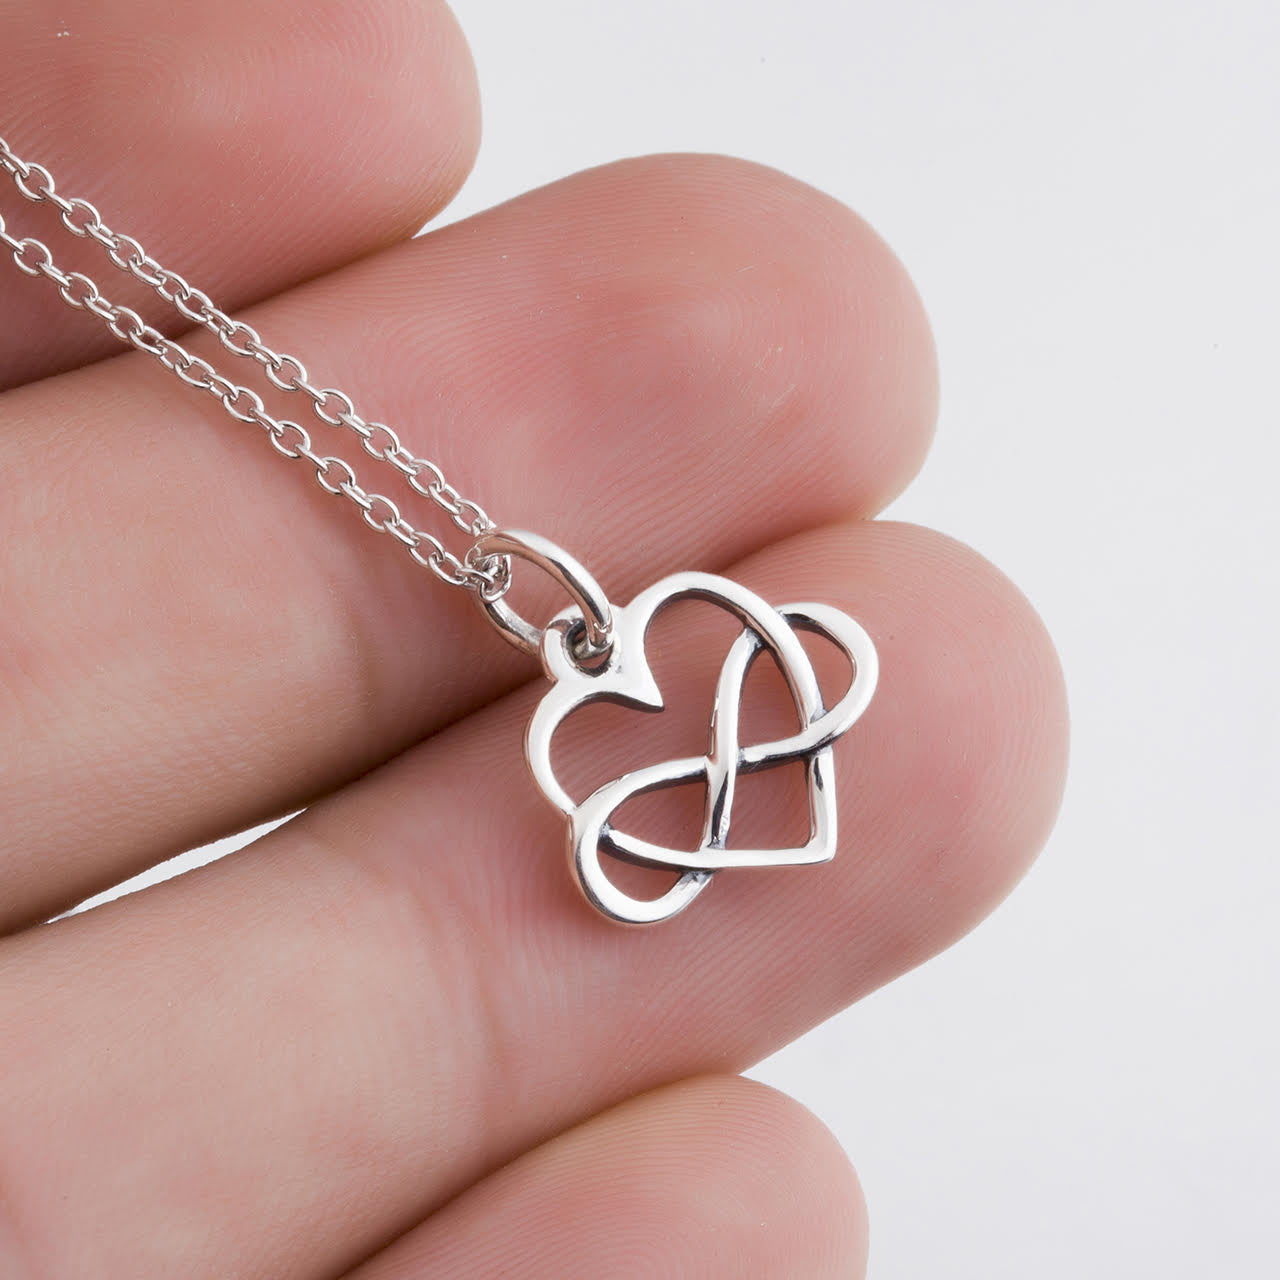 Sterling Silver Infinity Sign and Heart Pendant Necklace Casual and Formal Women